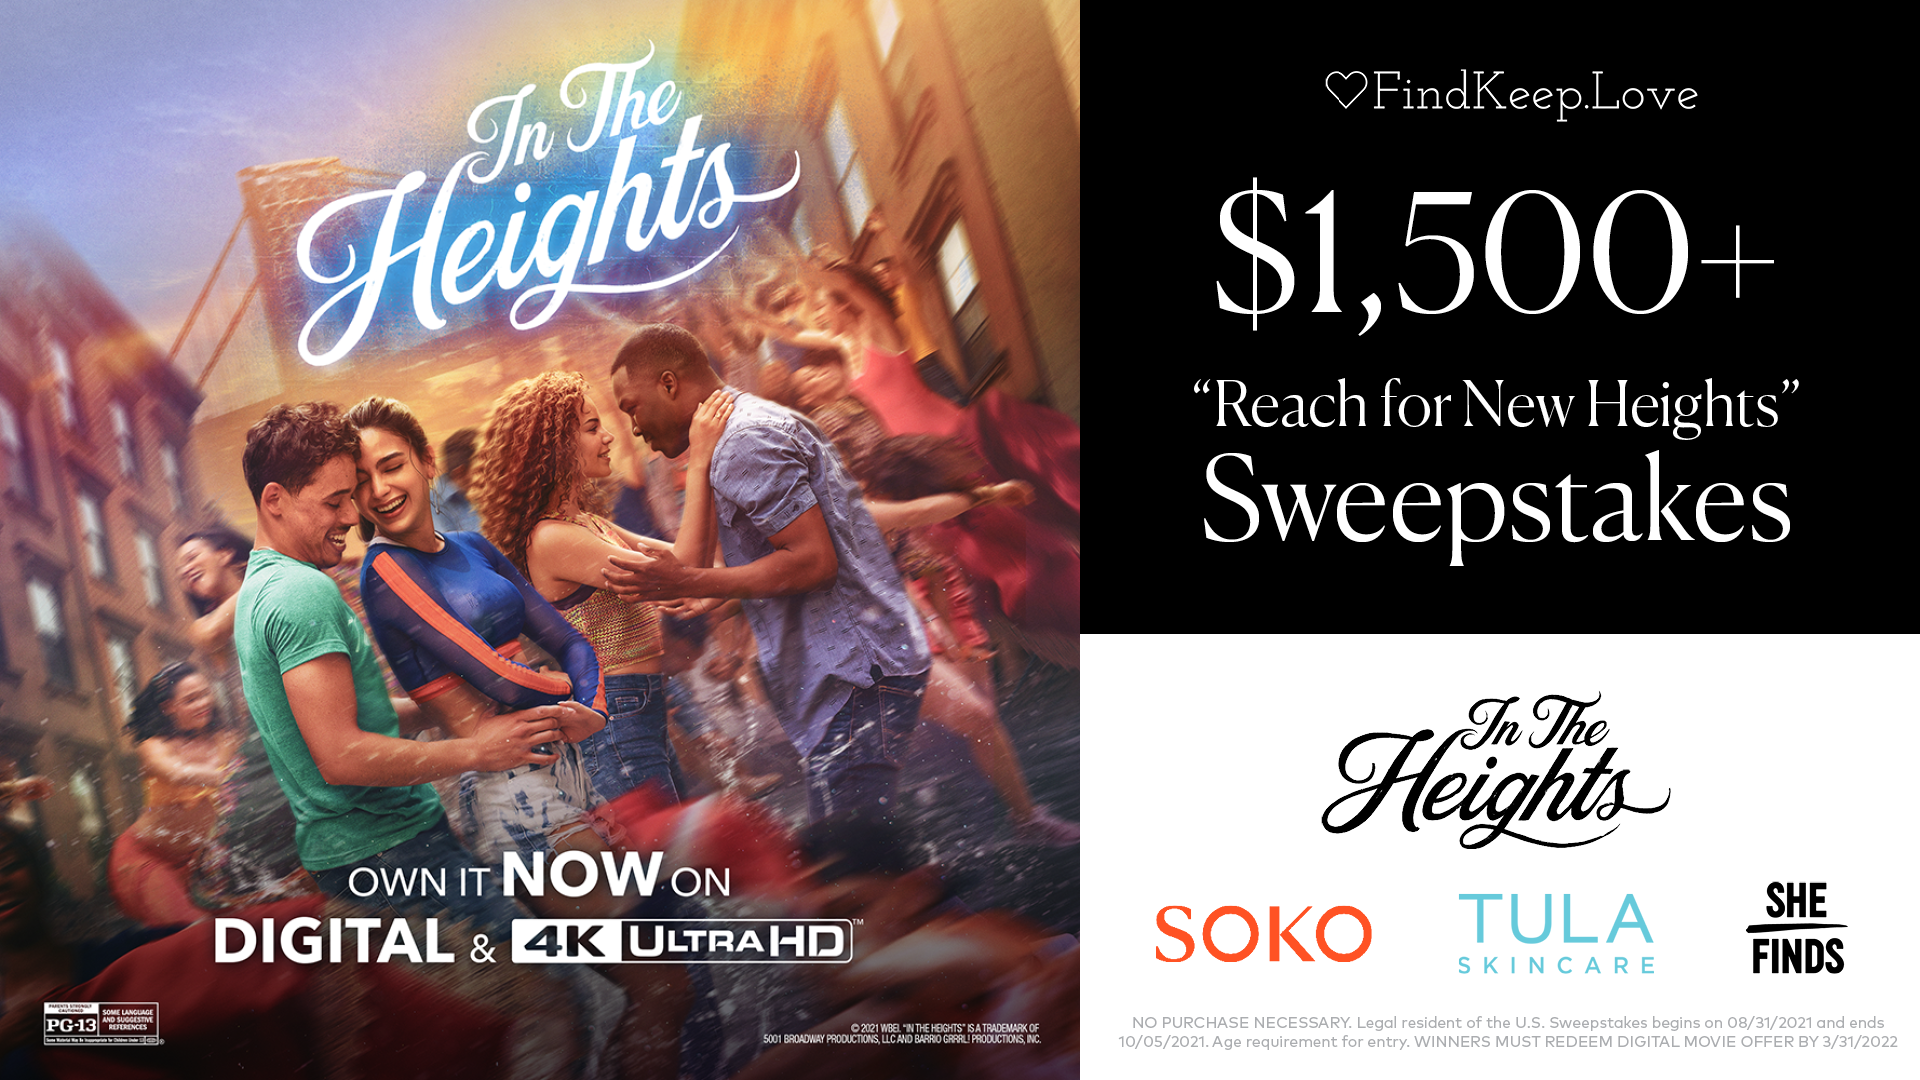 Reach for New Heights Sweepstakes